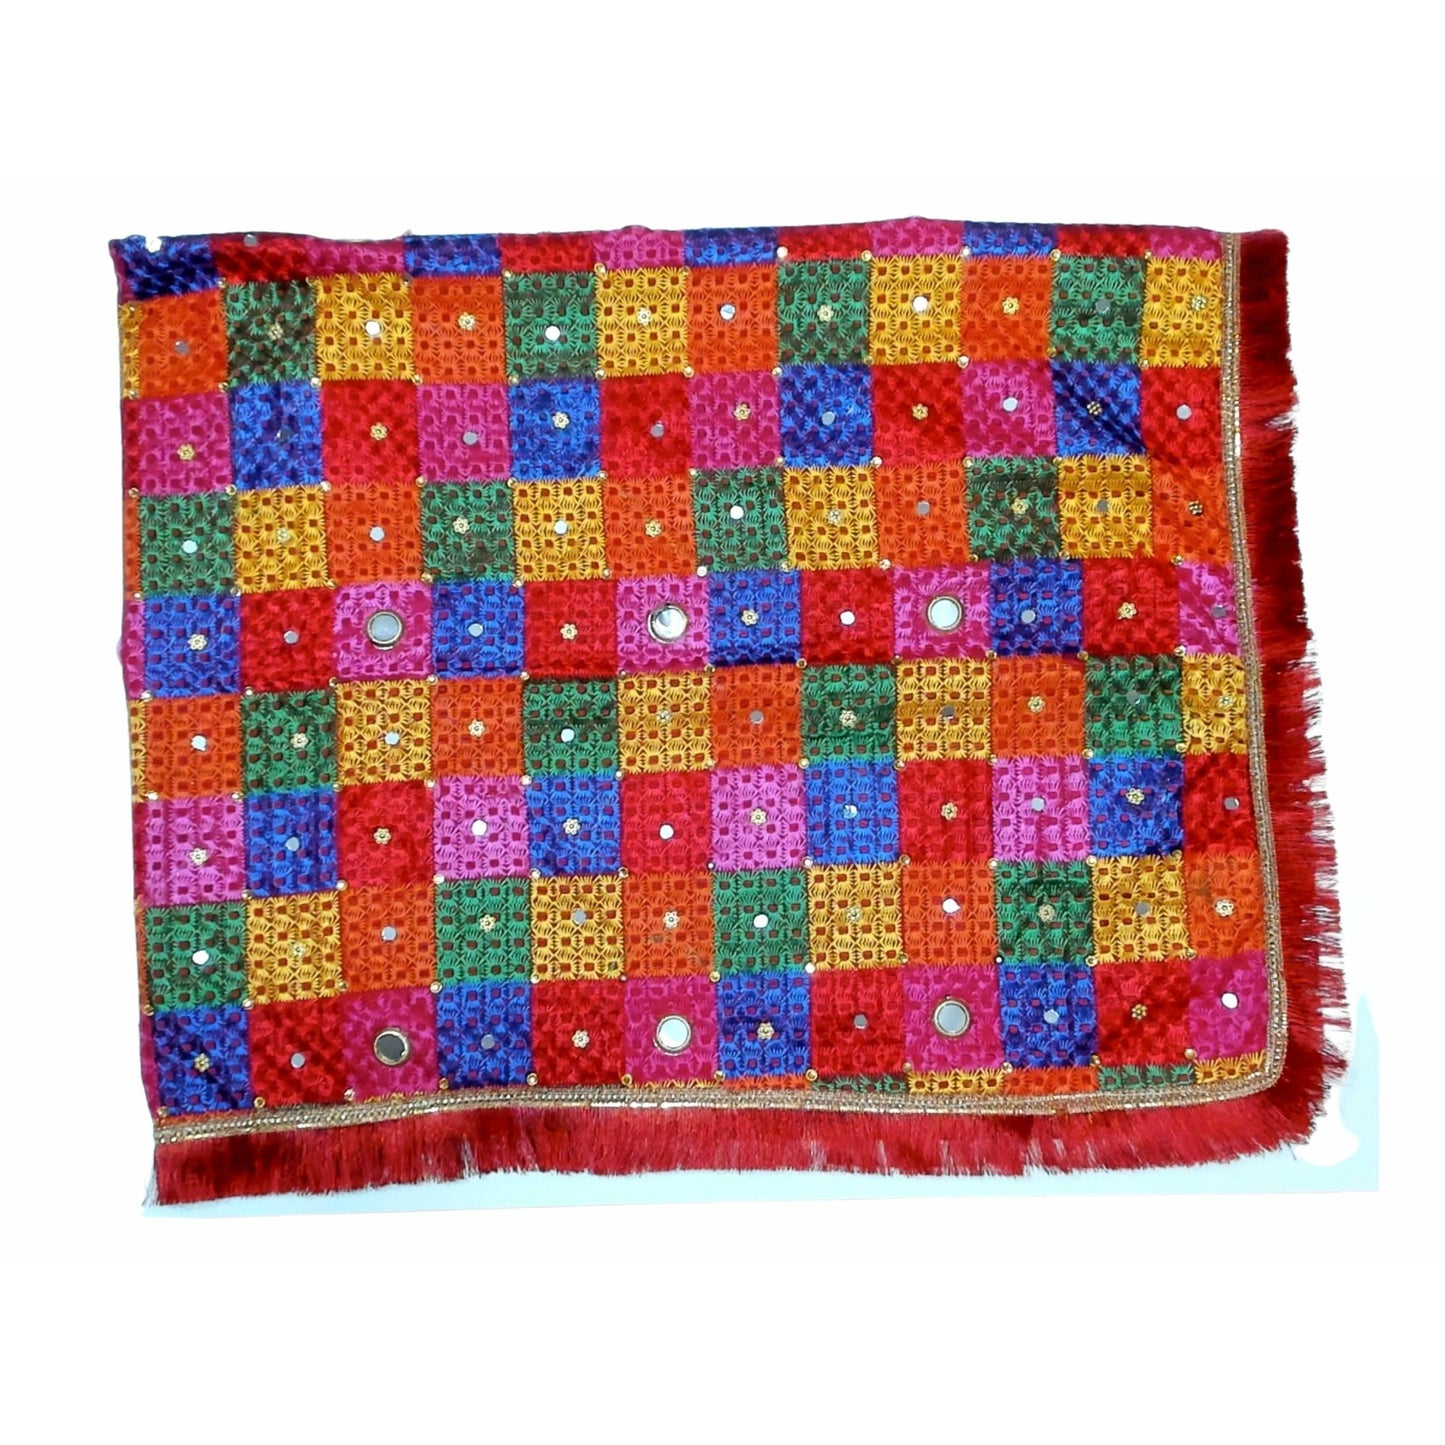 Phulkari / Fulkari Dupatta with beautiful embroidery work, mirror work and sequins all over the duppatta and red lace on the borders